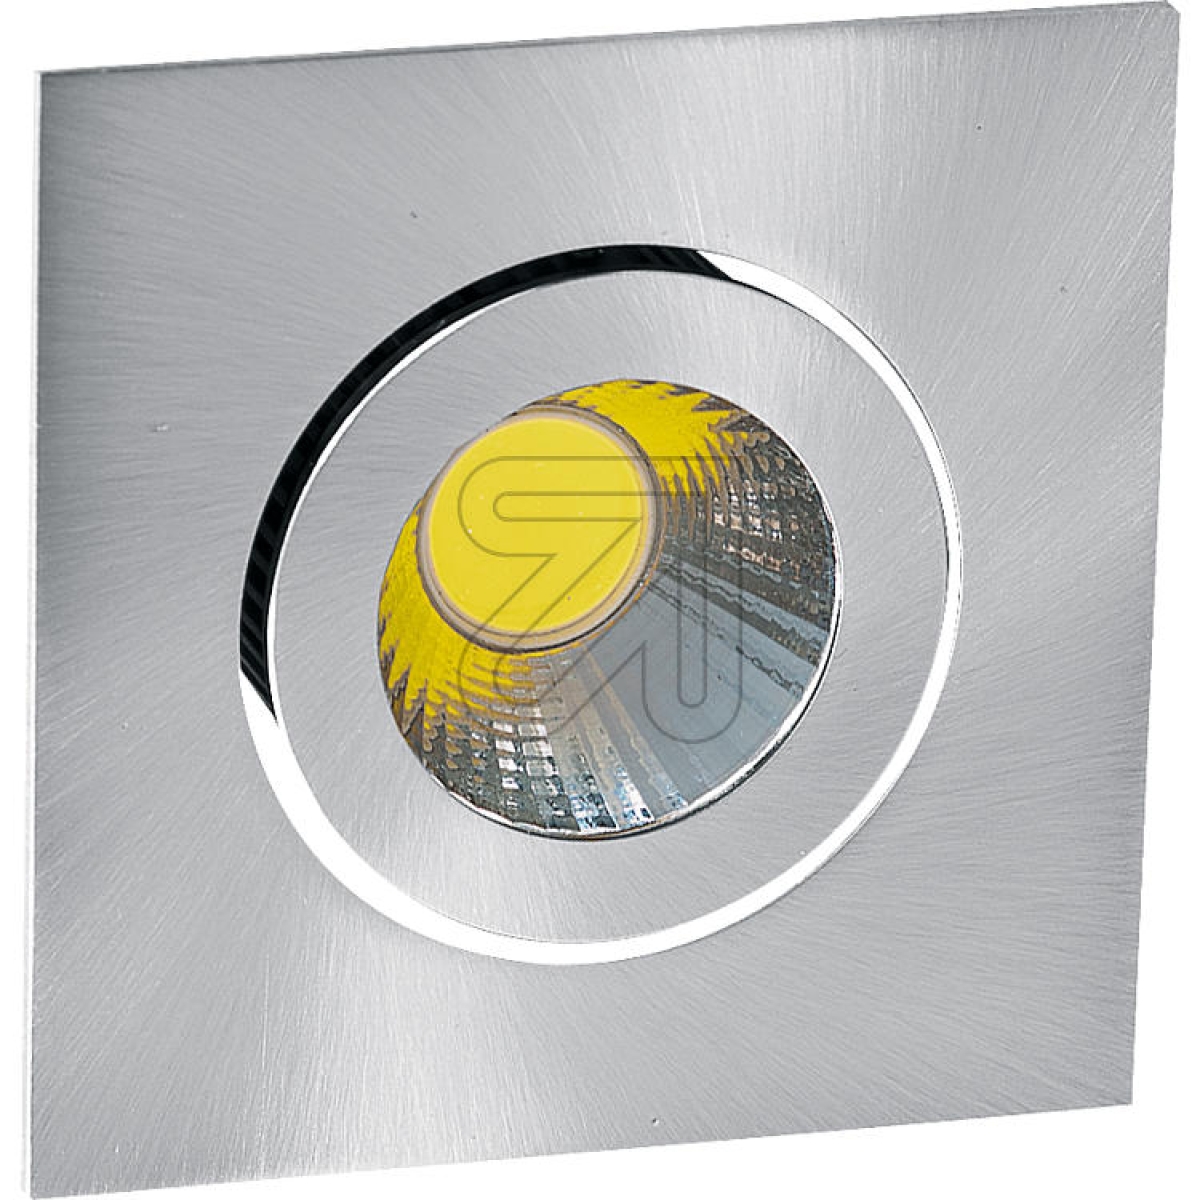 EVNPower LED recessed light stainless steel 4000K 8.4W PC24N91340Article-No: 624125